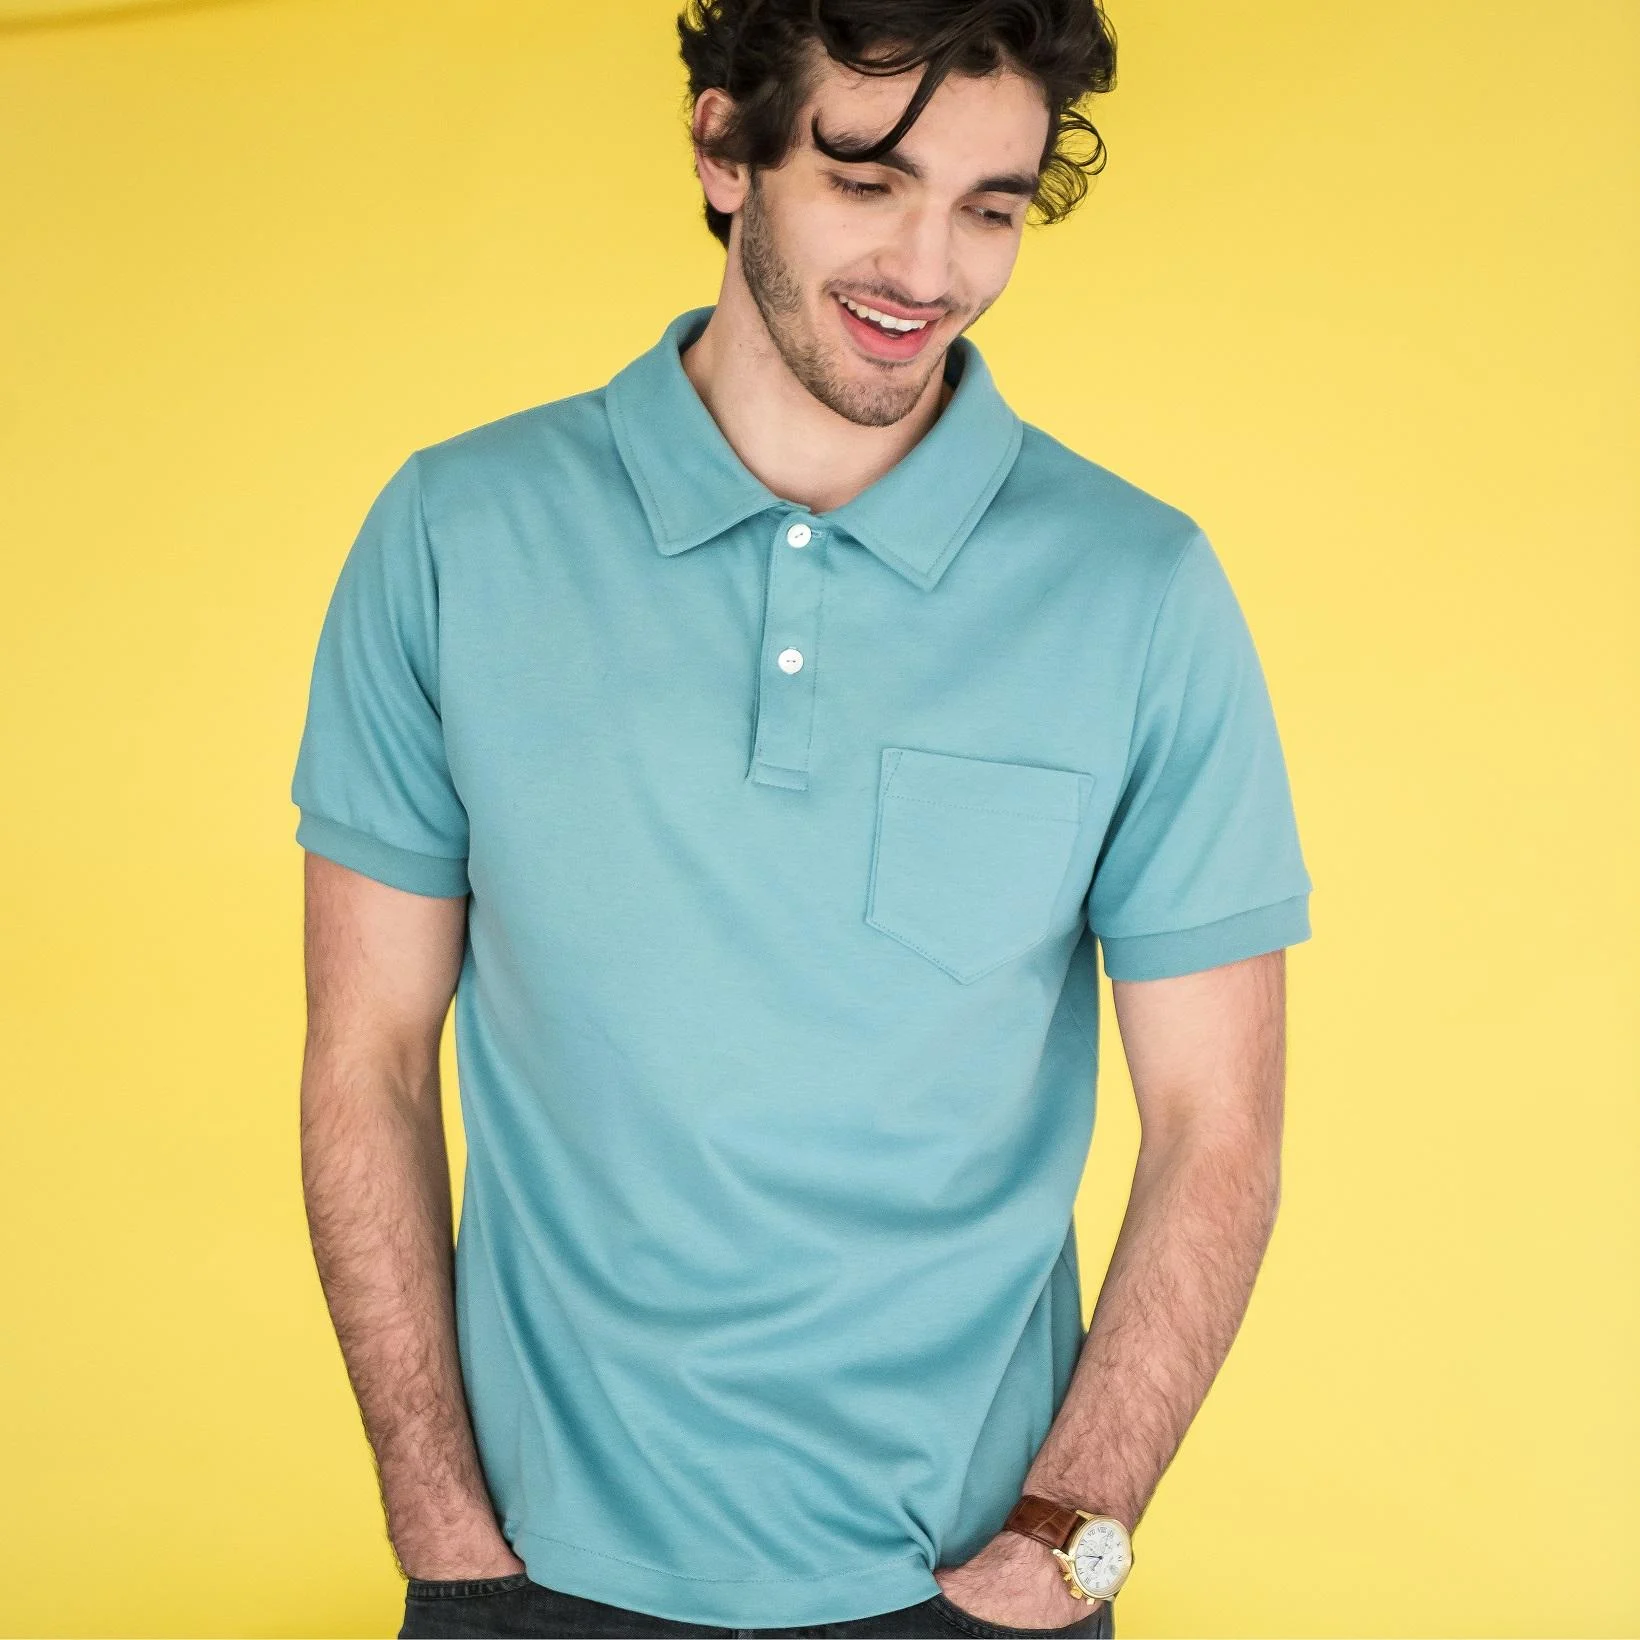 Aspen Polo Shirt: The Perfect Blend Of Comfort And Style With A Free Sewing Pattern!